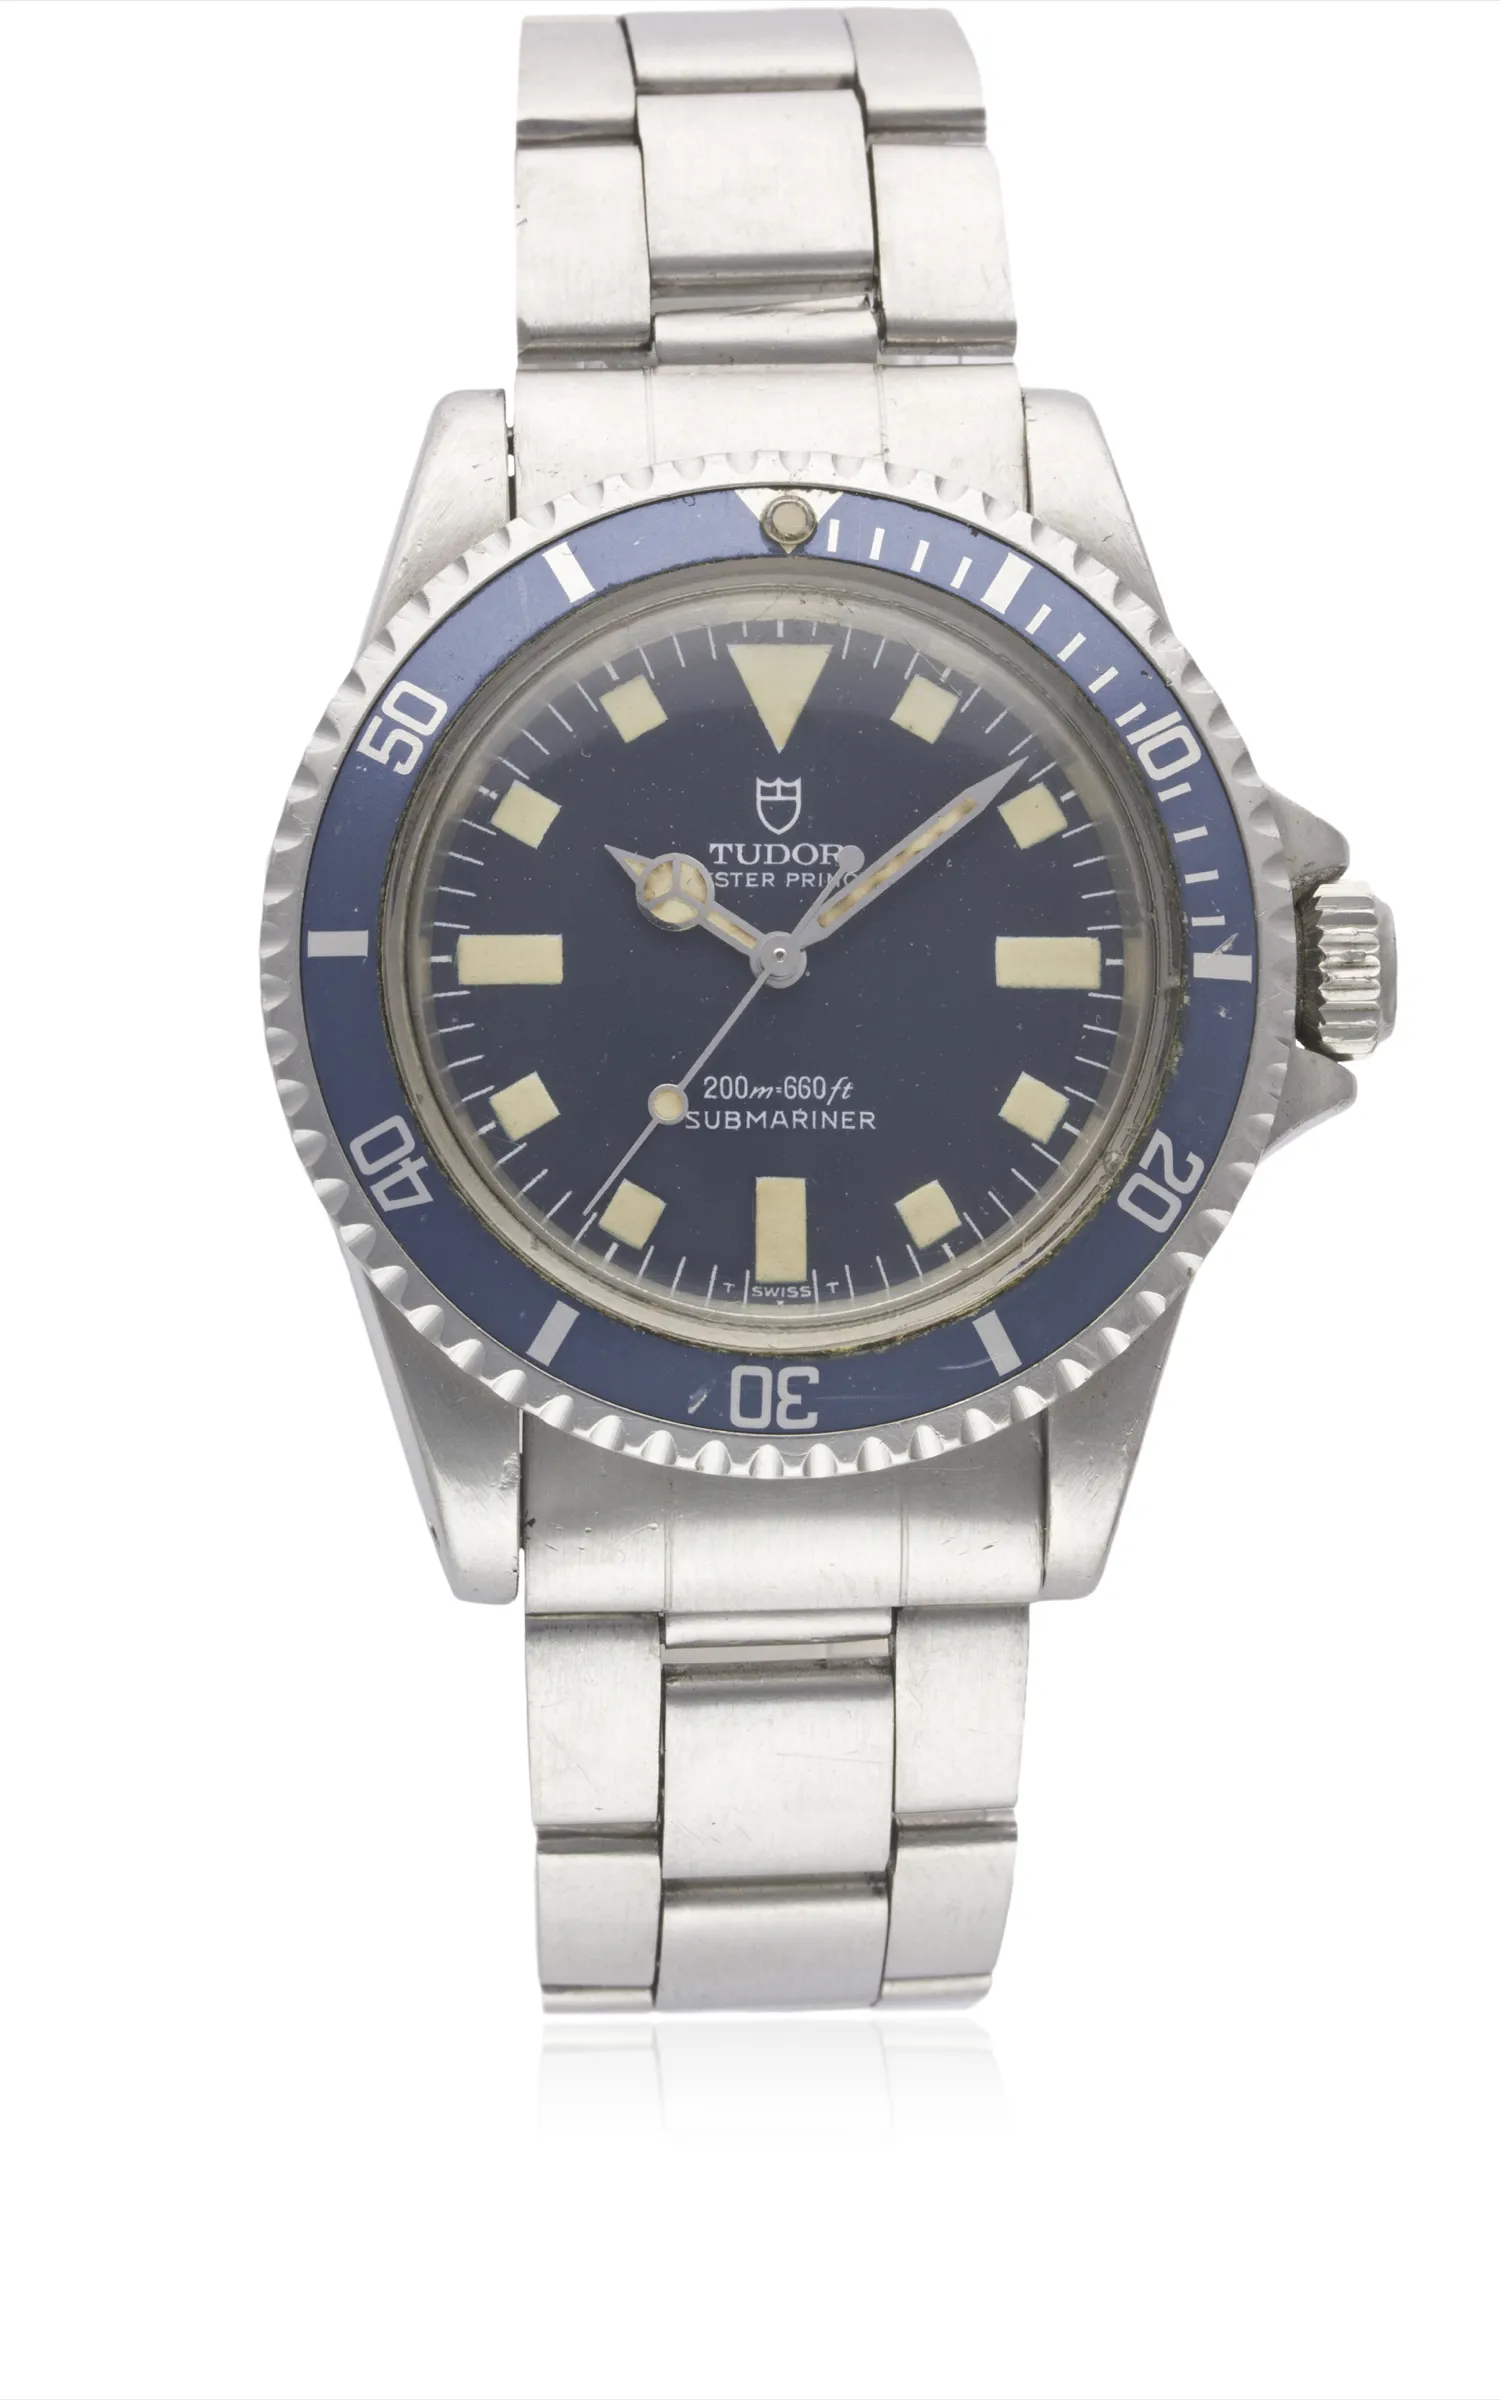 Tudor Oyster Prince Submariner "Snowflake" 94010 40mm Stainless steel Blue